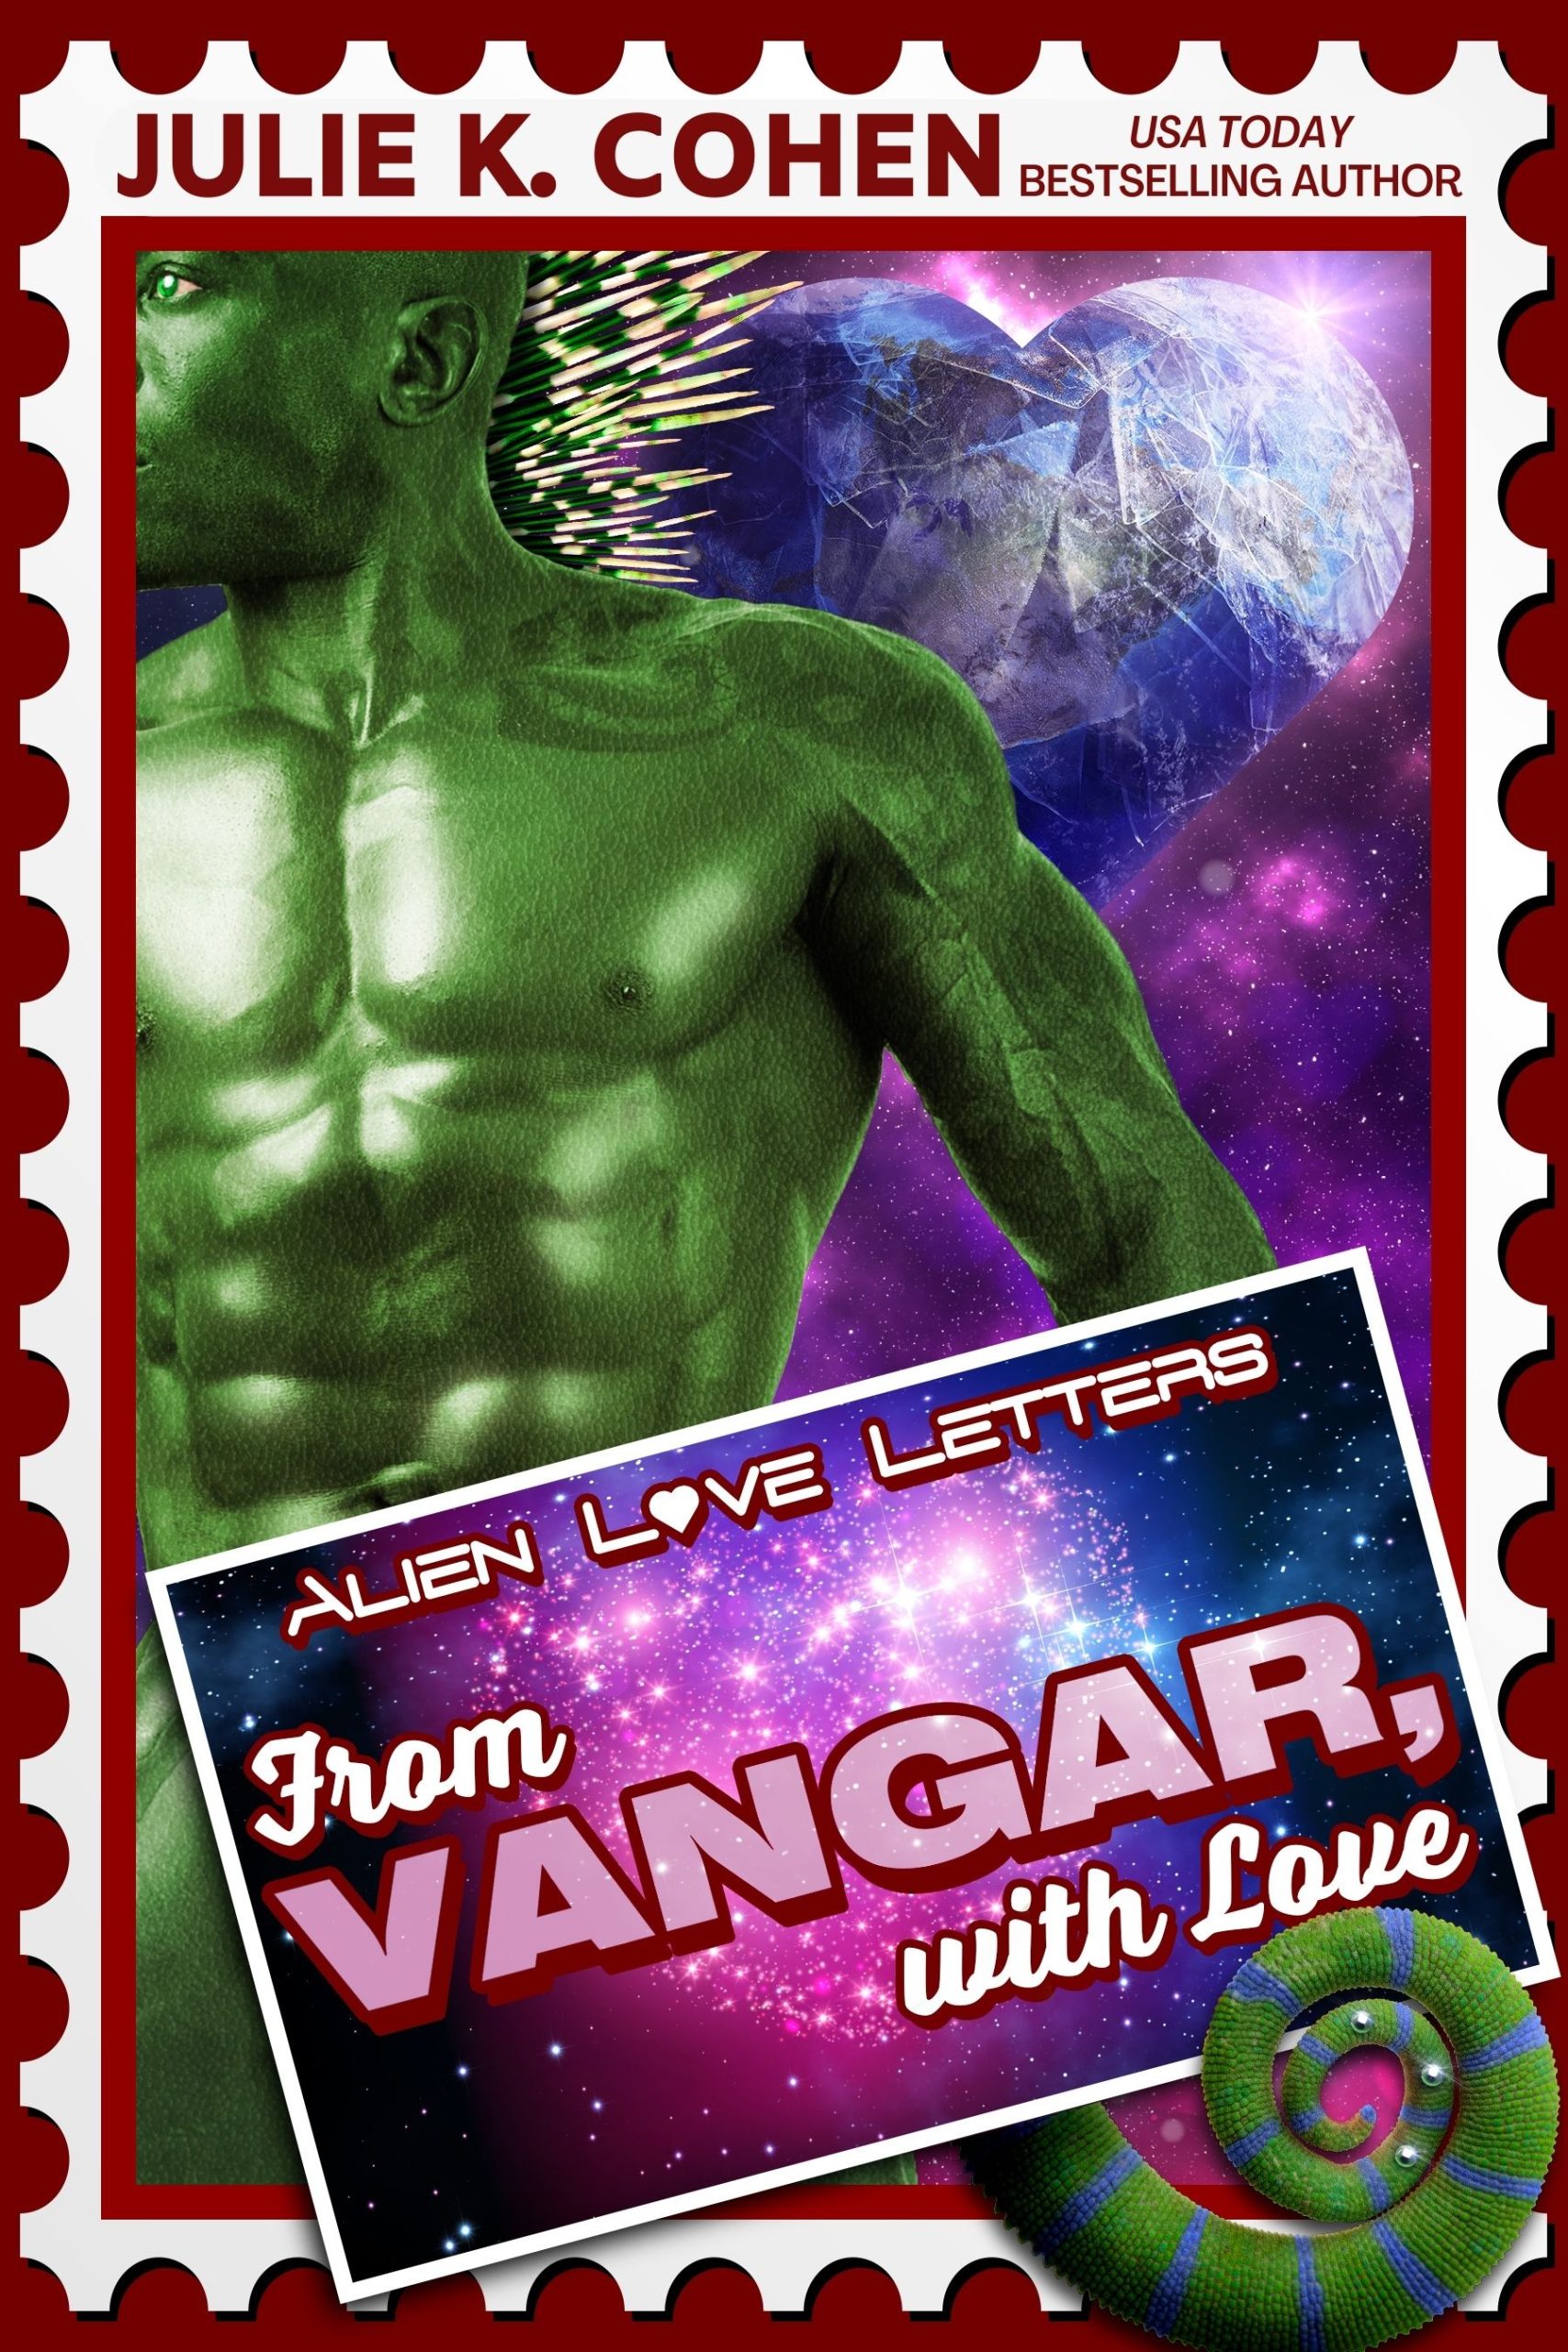 From Vangar With Love cover, green alien with spikes and tail with studs